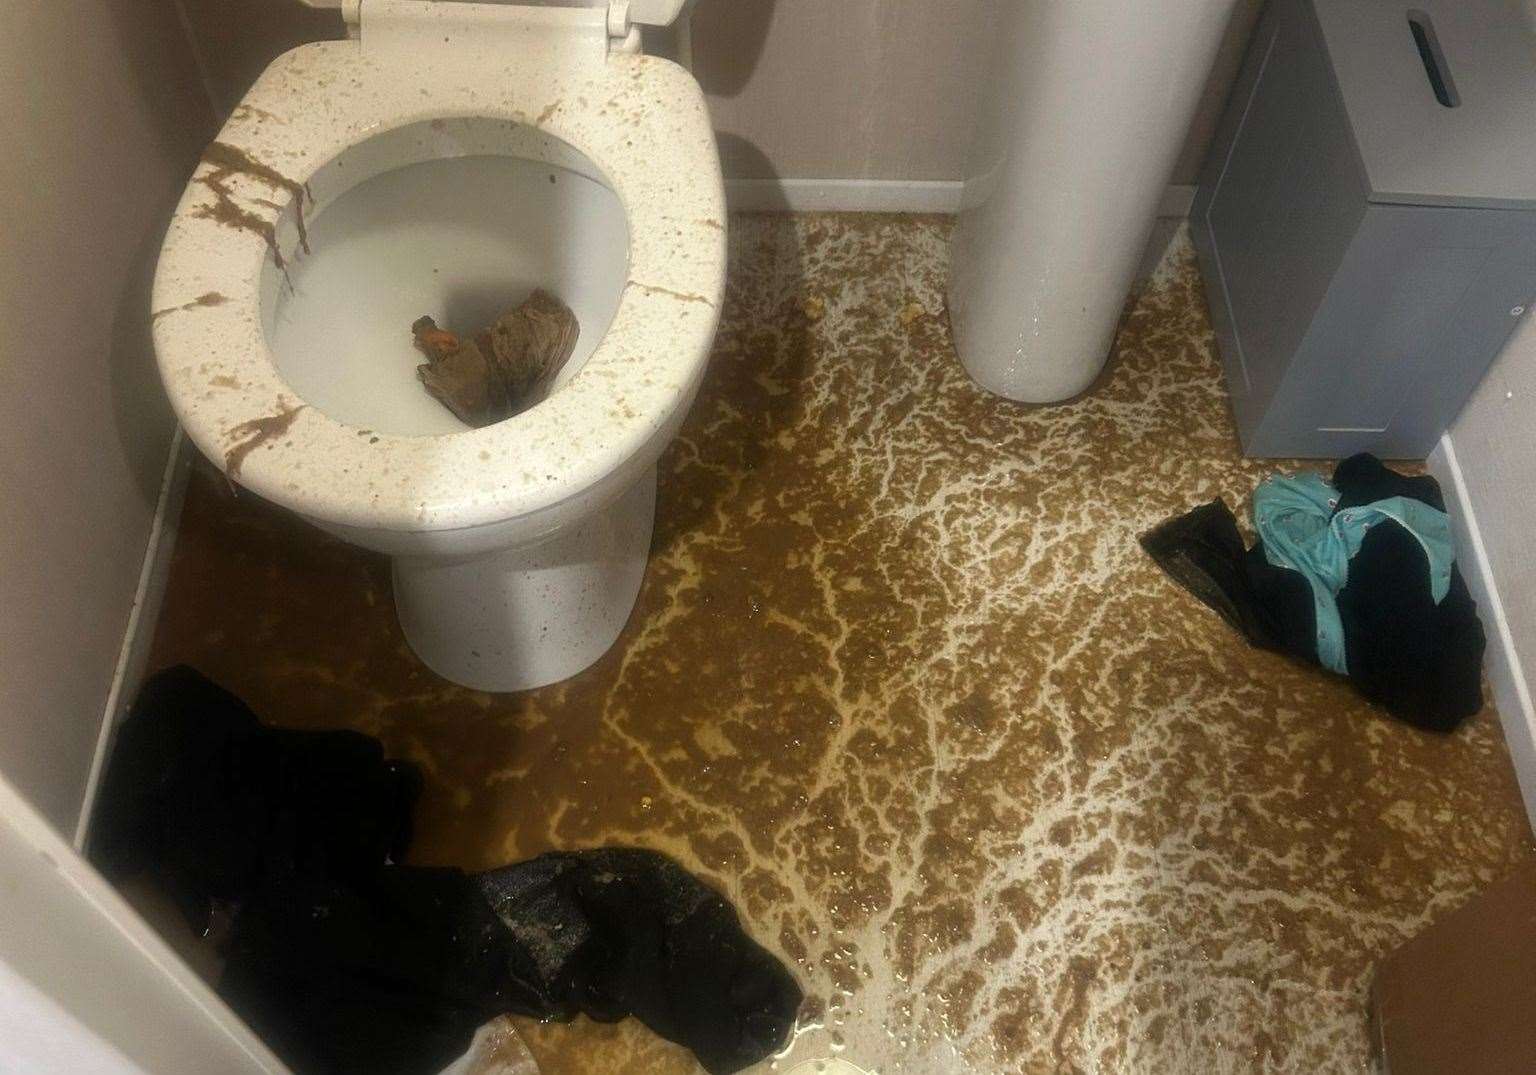 The sewage in Tammy Samuel's home. Picture: Tammy Samuel